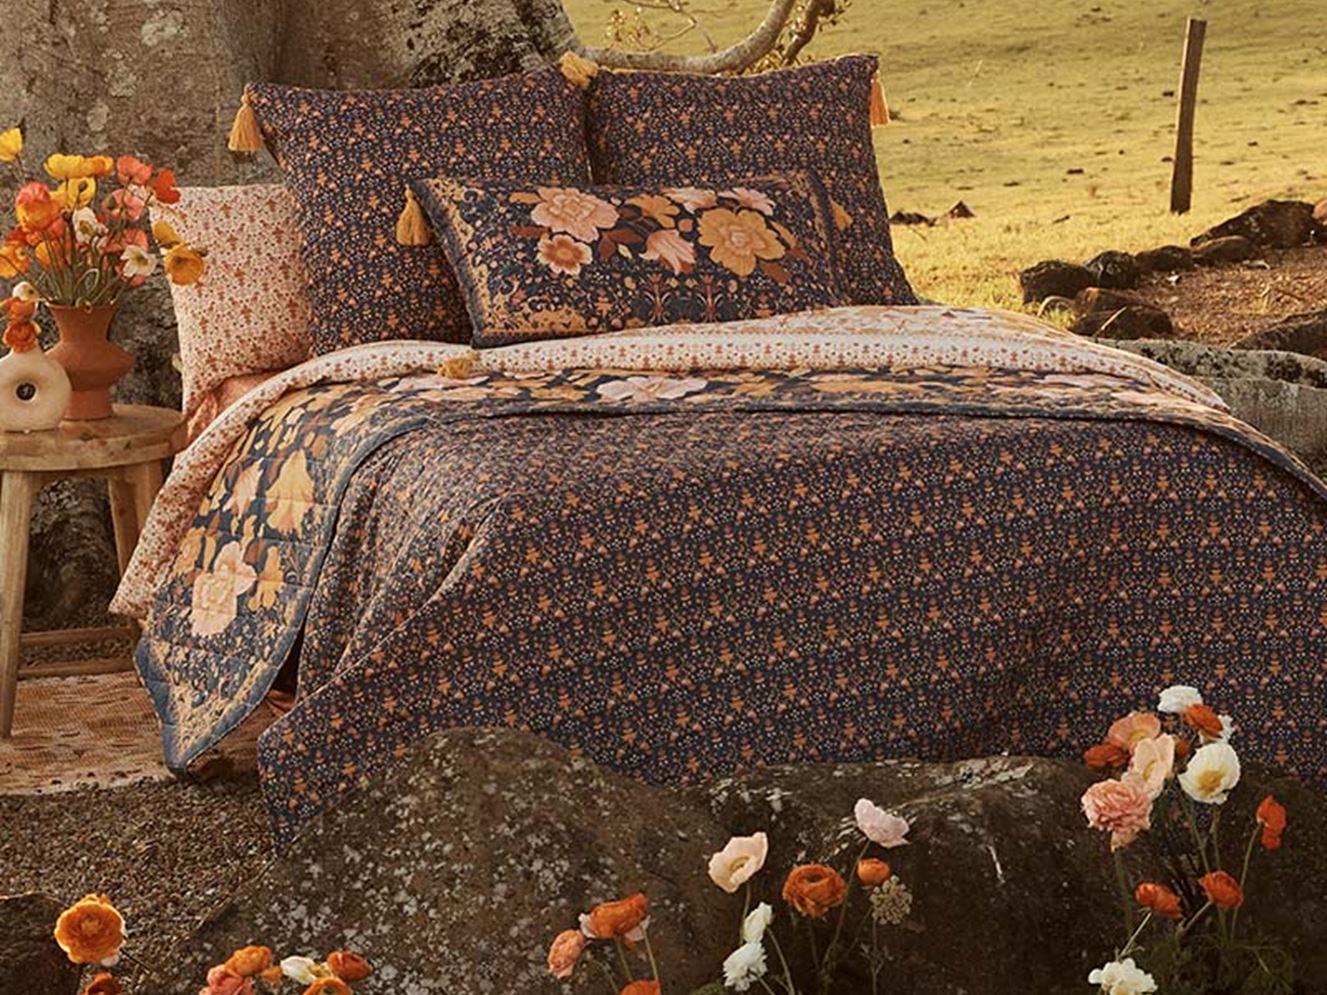 Bed styled with vintage florals in collection.